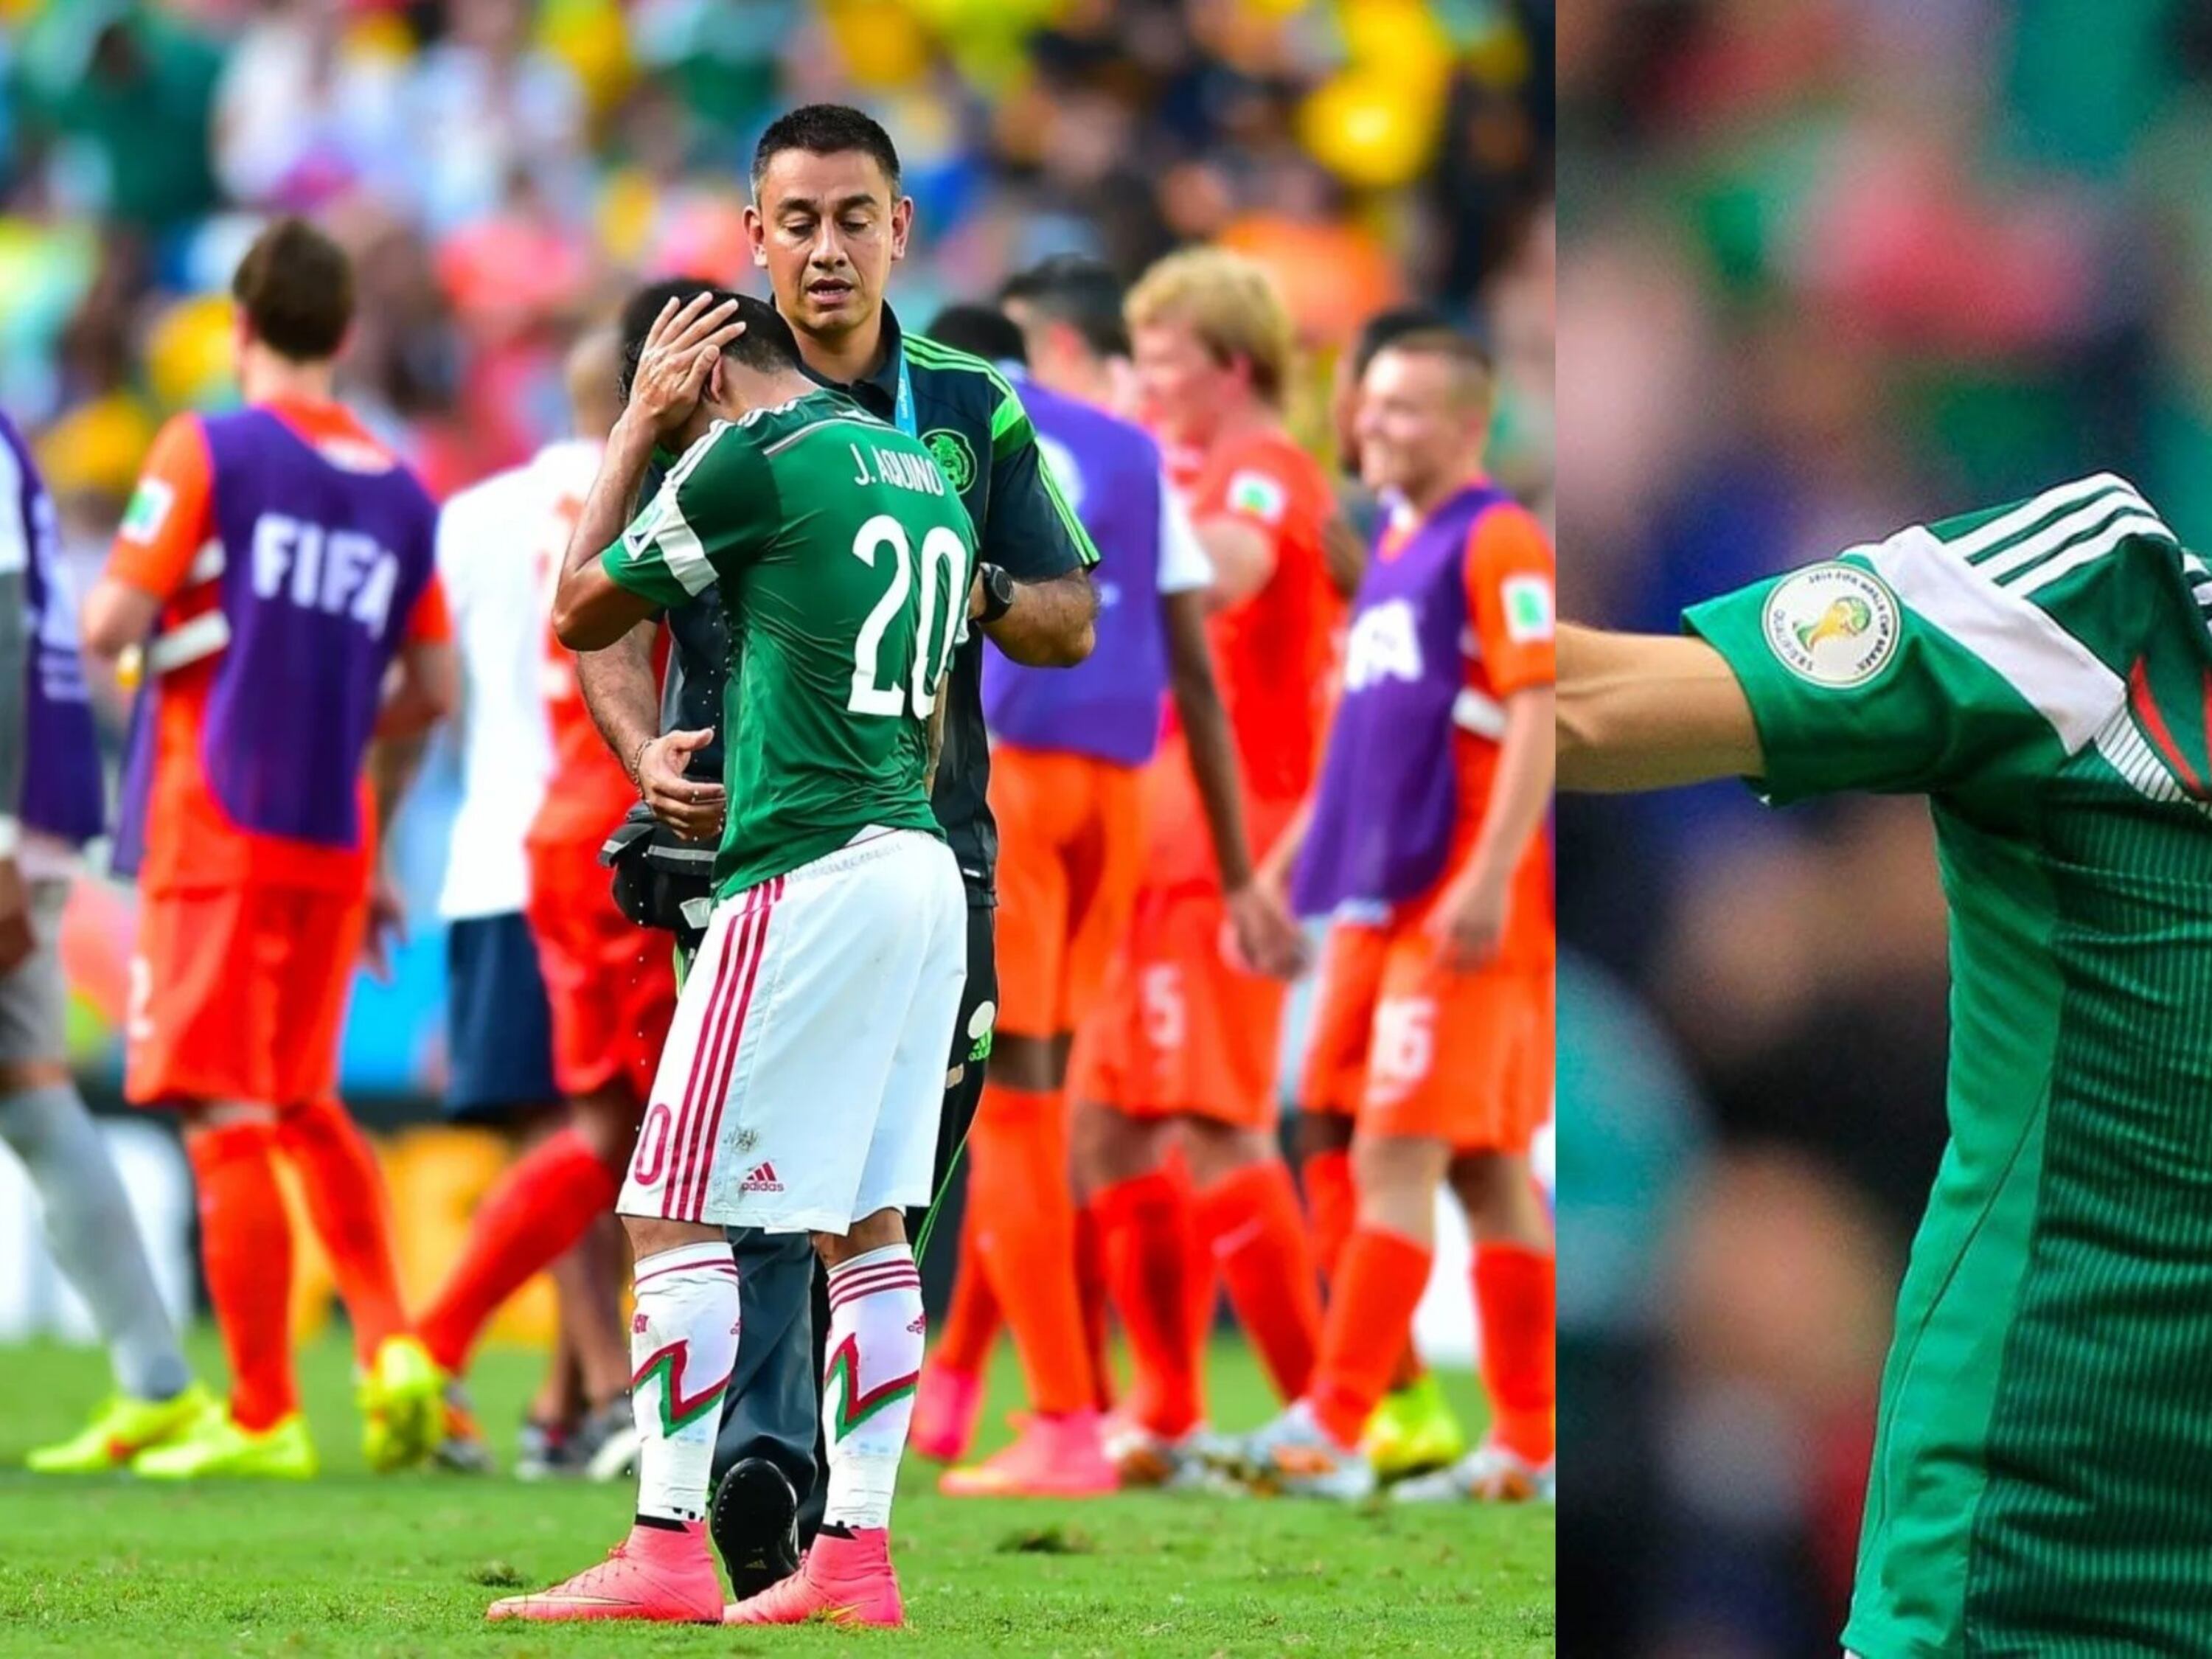 Oribe Peralta told who was responsible for losing to the Netherlands in the 2014 World Cup